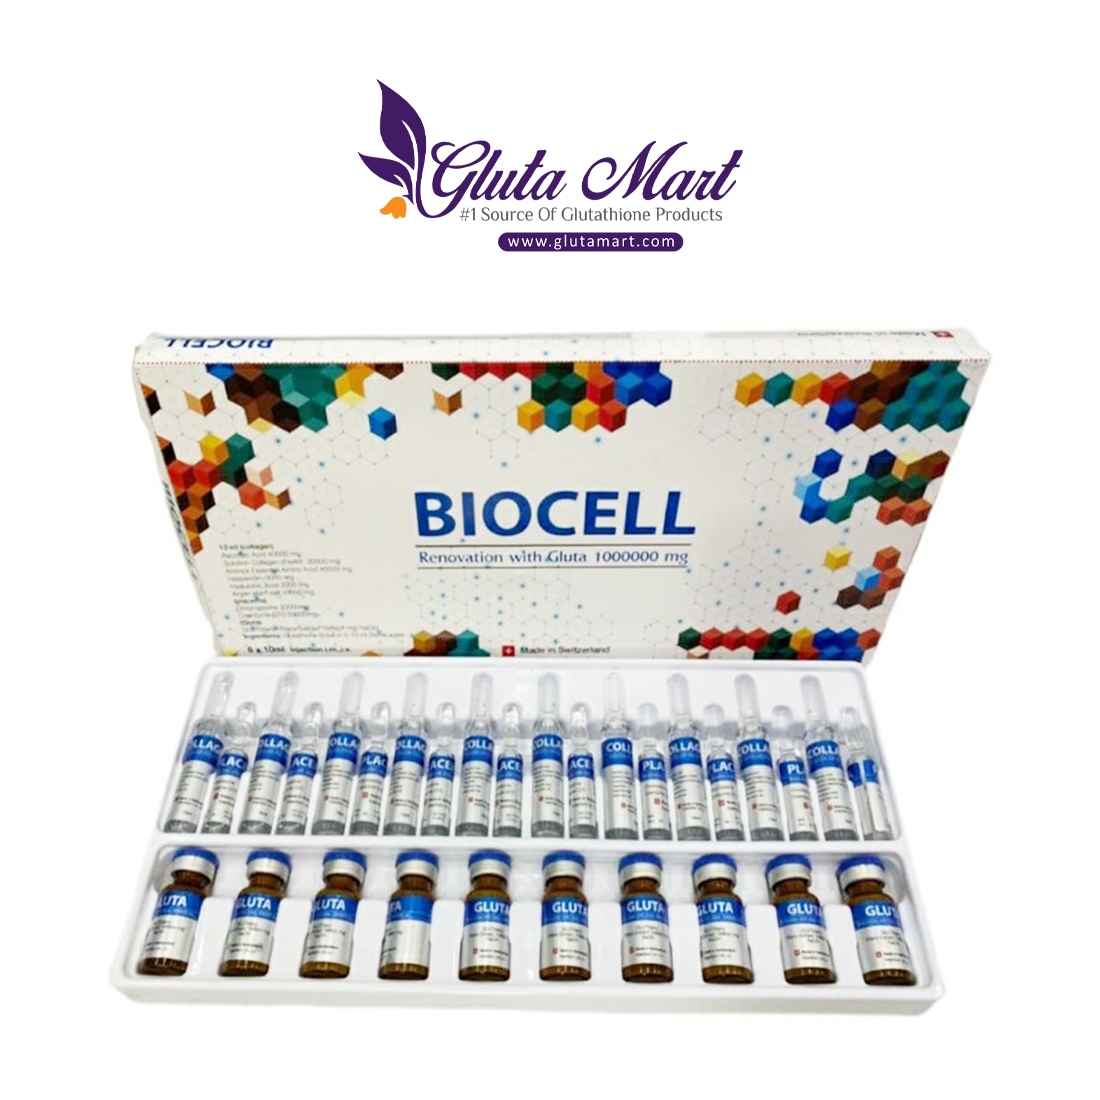 Biocell Renovation With Gluta 1000000mg Whitening Injection